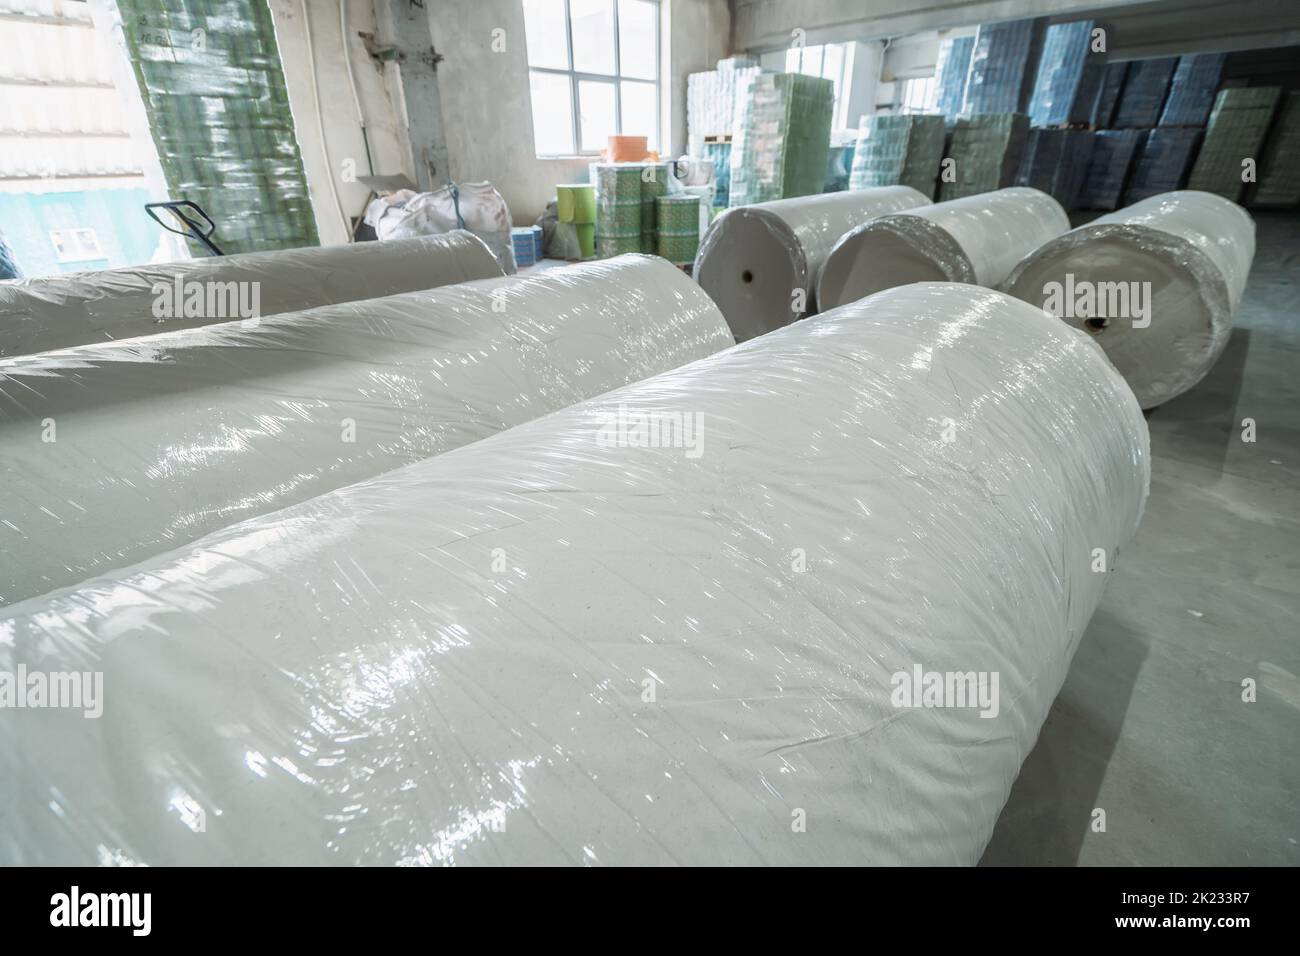 Large rolls of paper in a paper recycling factory. Stock Photo